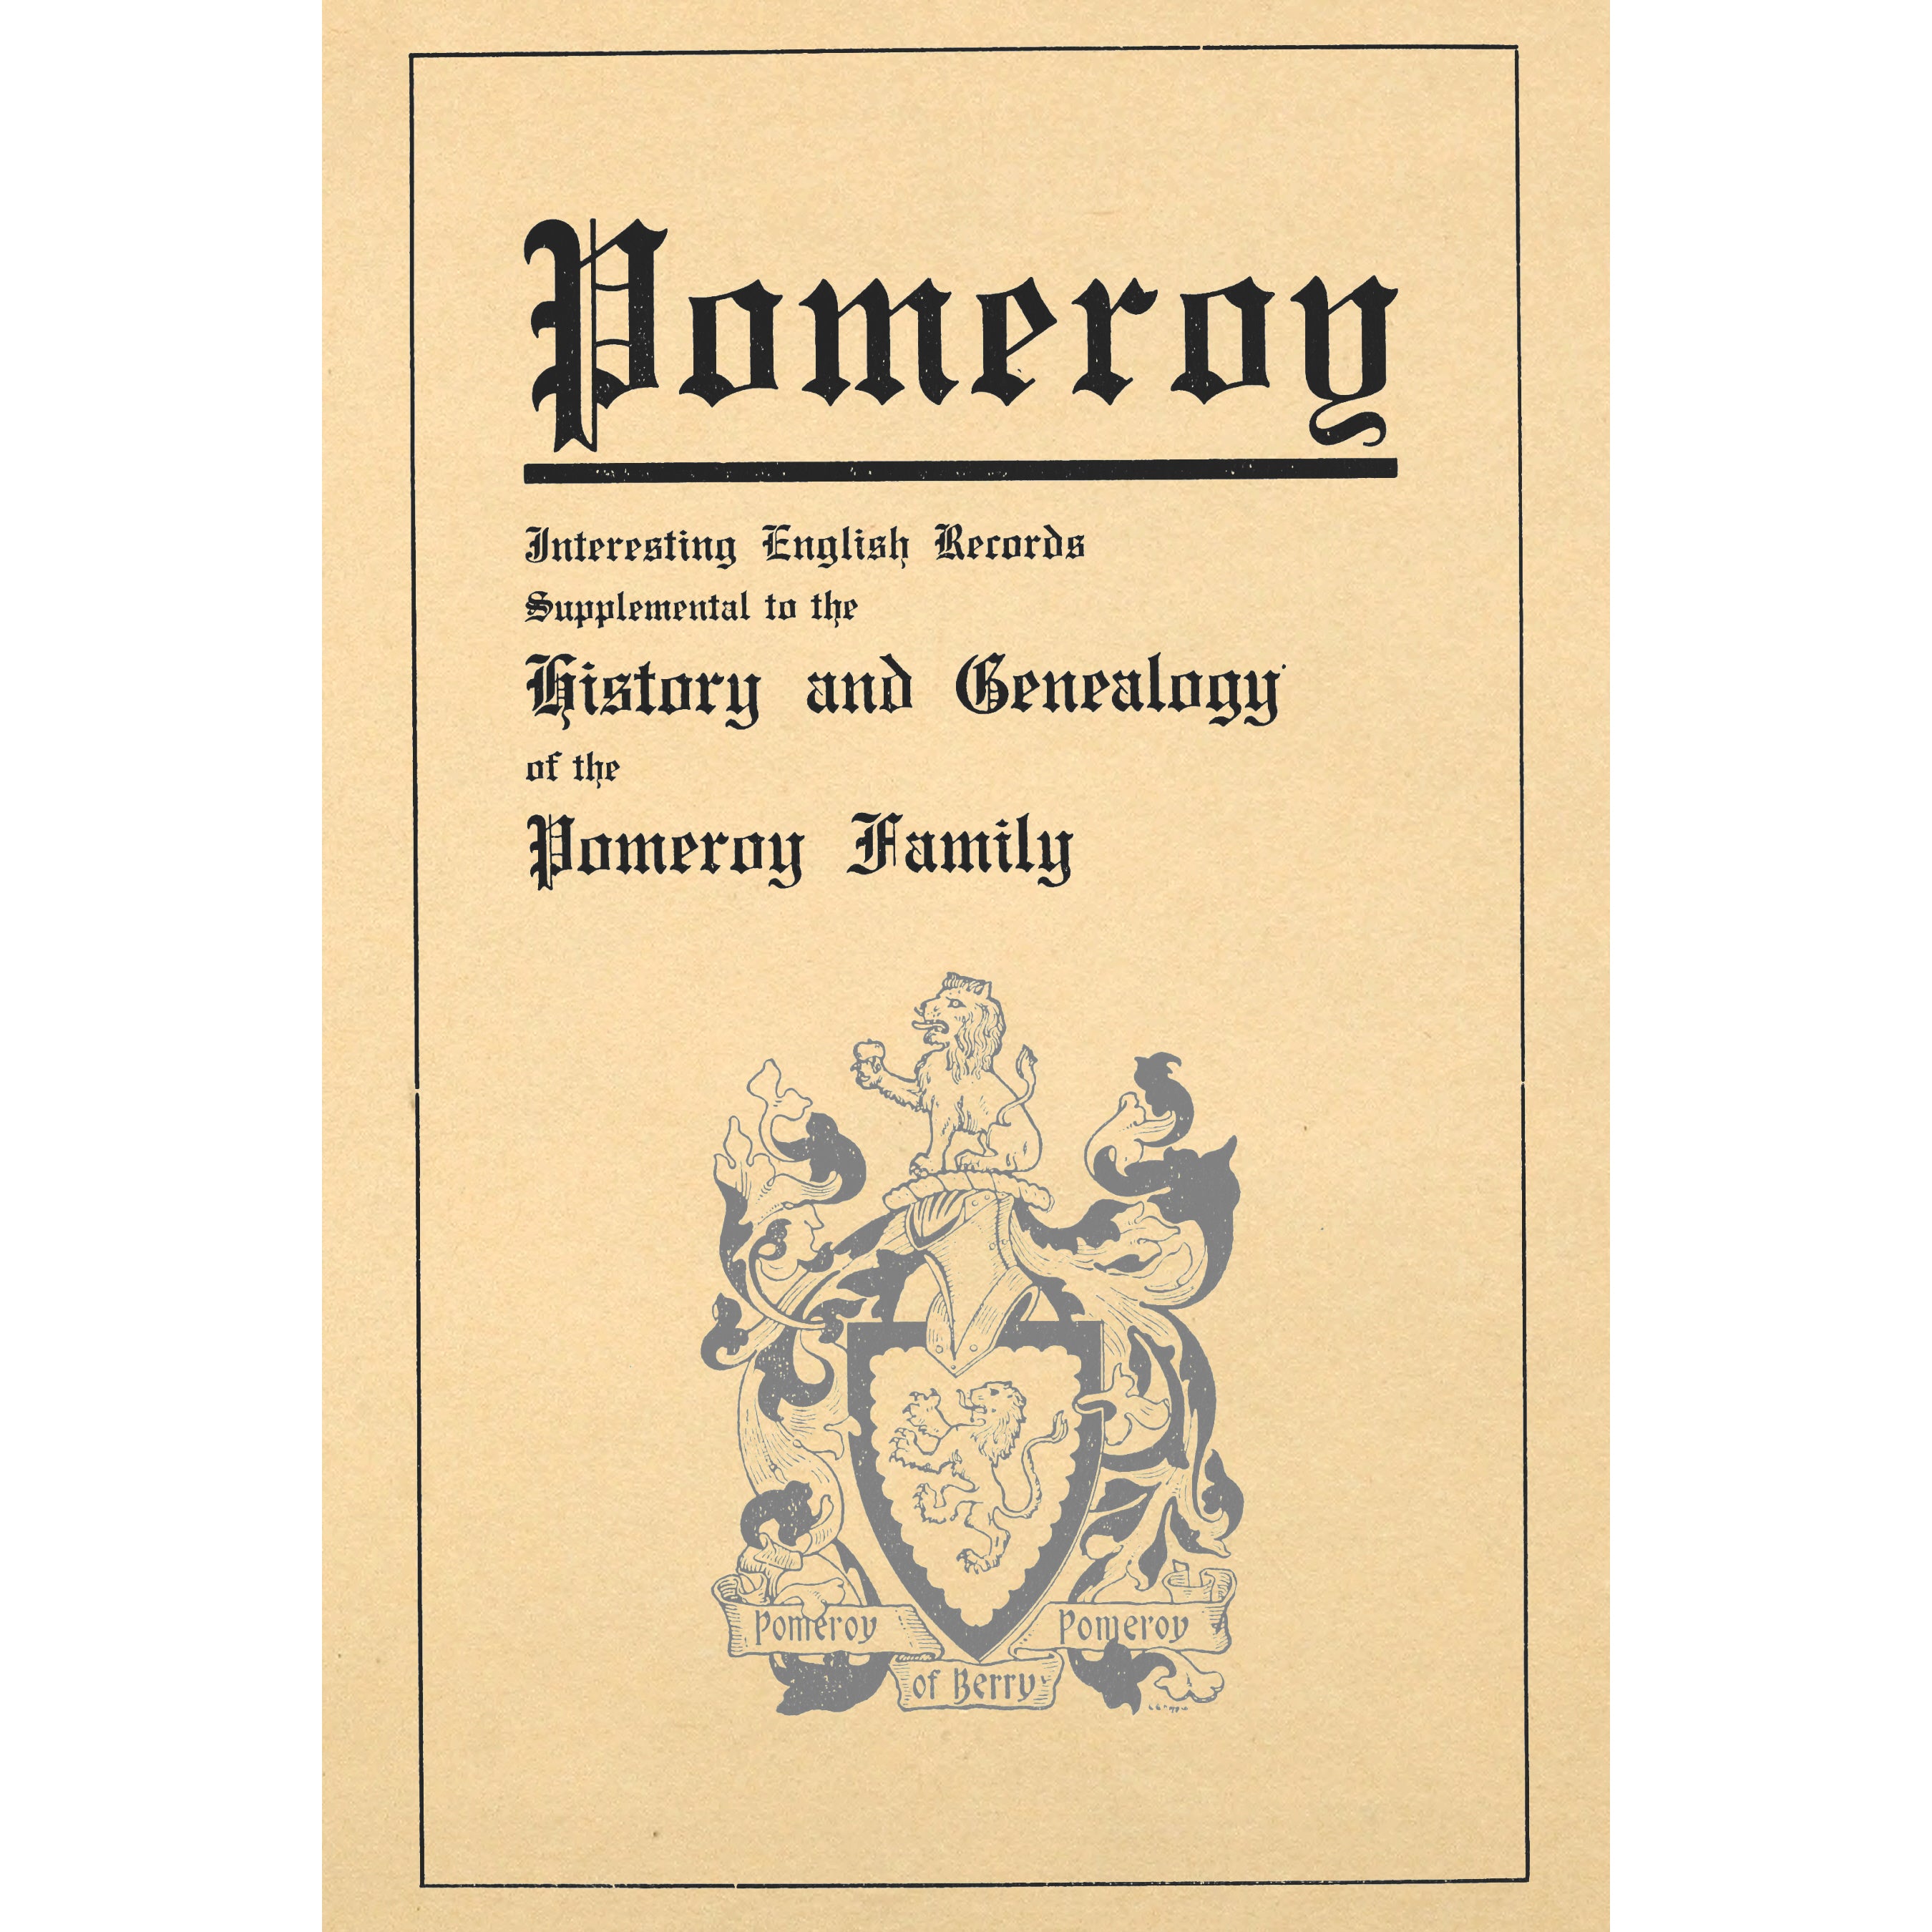 Pomeroy; interesting English records supplemental to the History and genealogy of the Pomeroy family